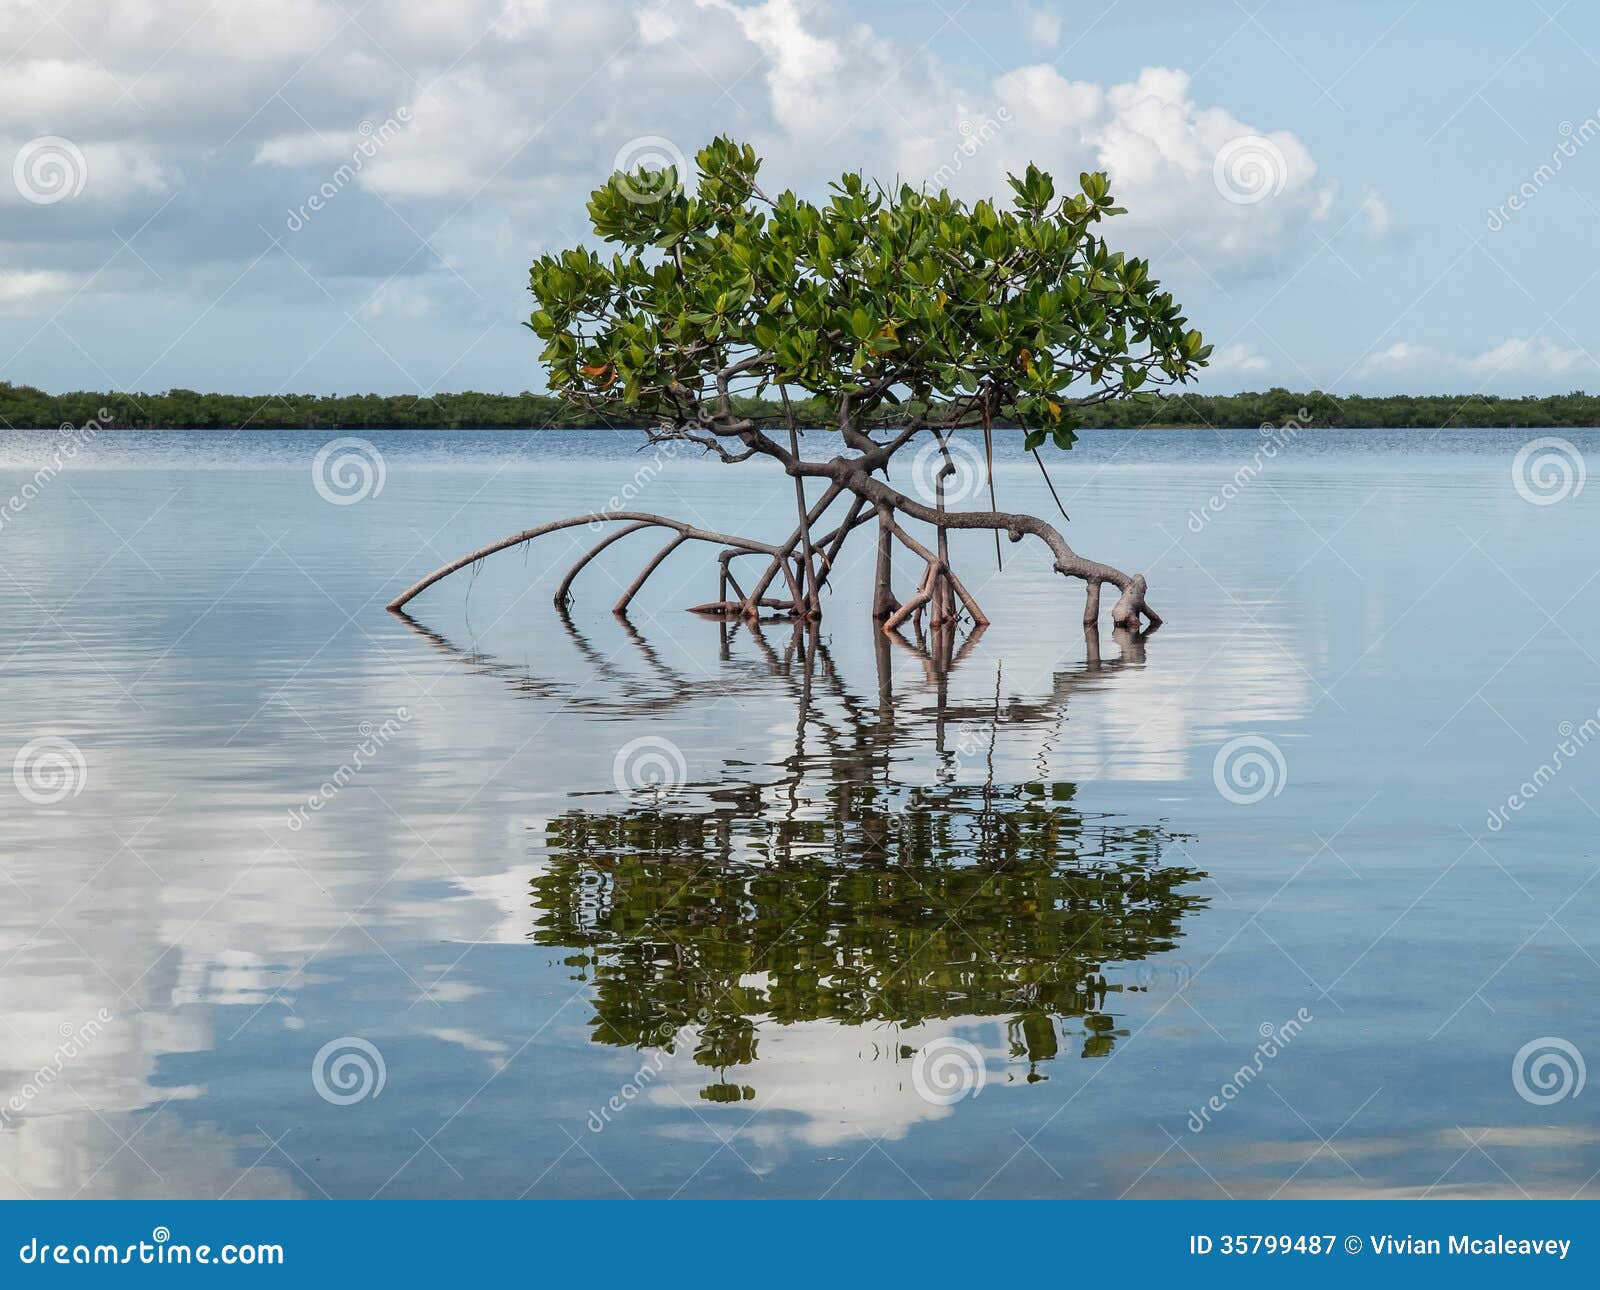 red-mangrove-shallow-bay-perched-above-n